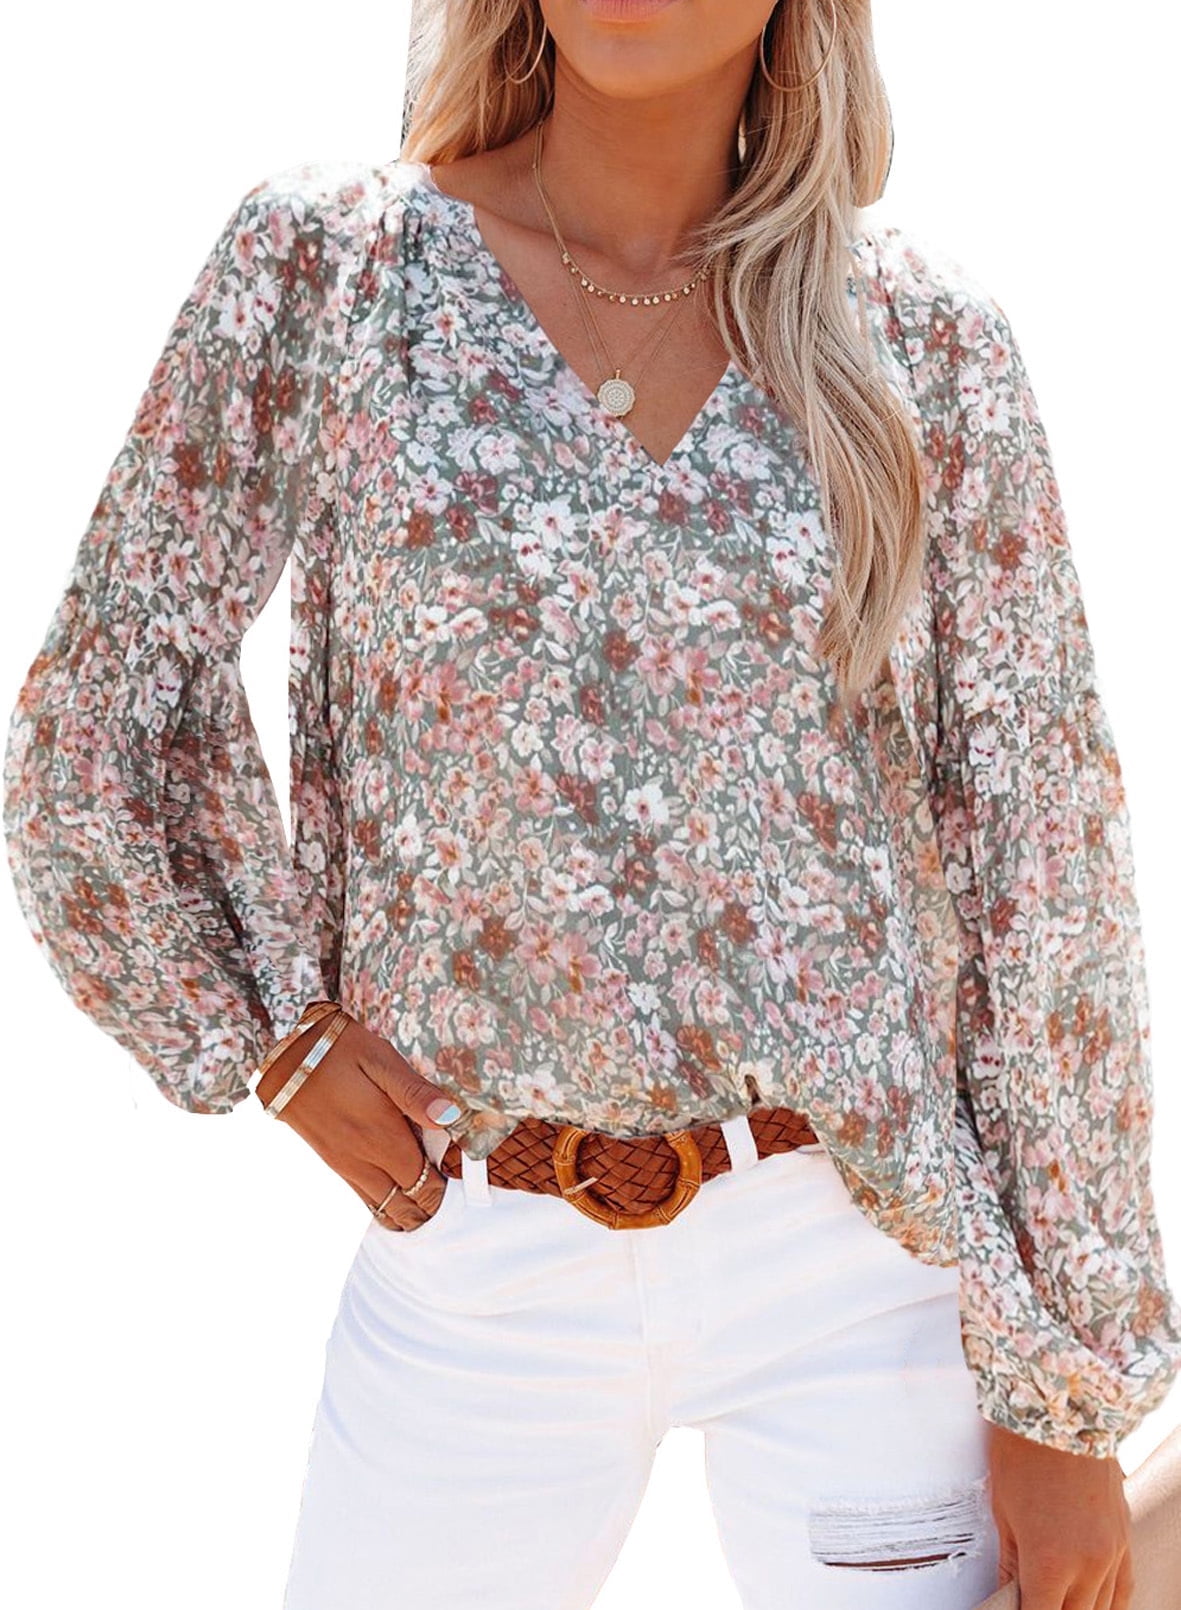 Astylish Boho Tops for Women Casual Spring Floral Print Chiffon Shirts V  Neck Long Sleeve Blouses Size XL 